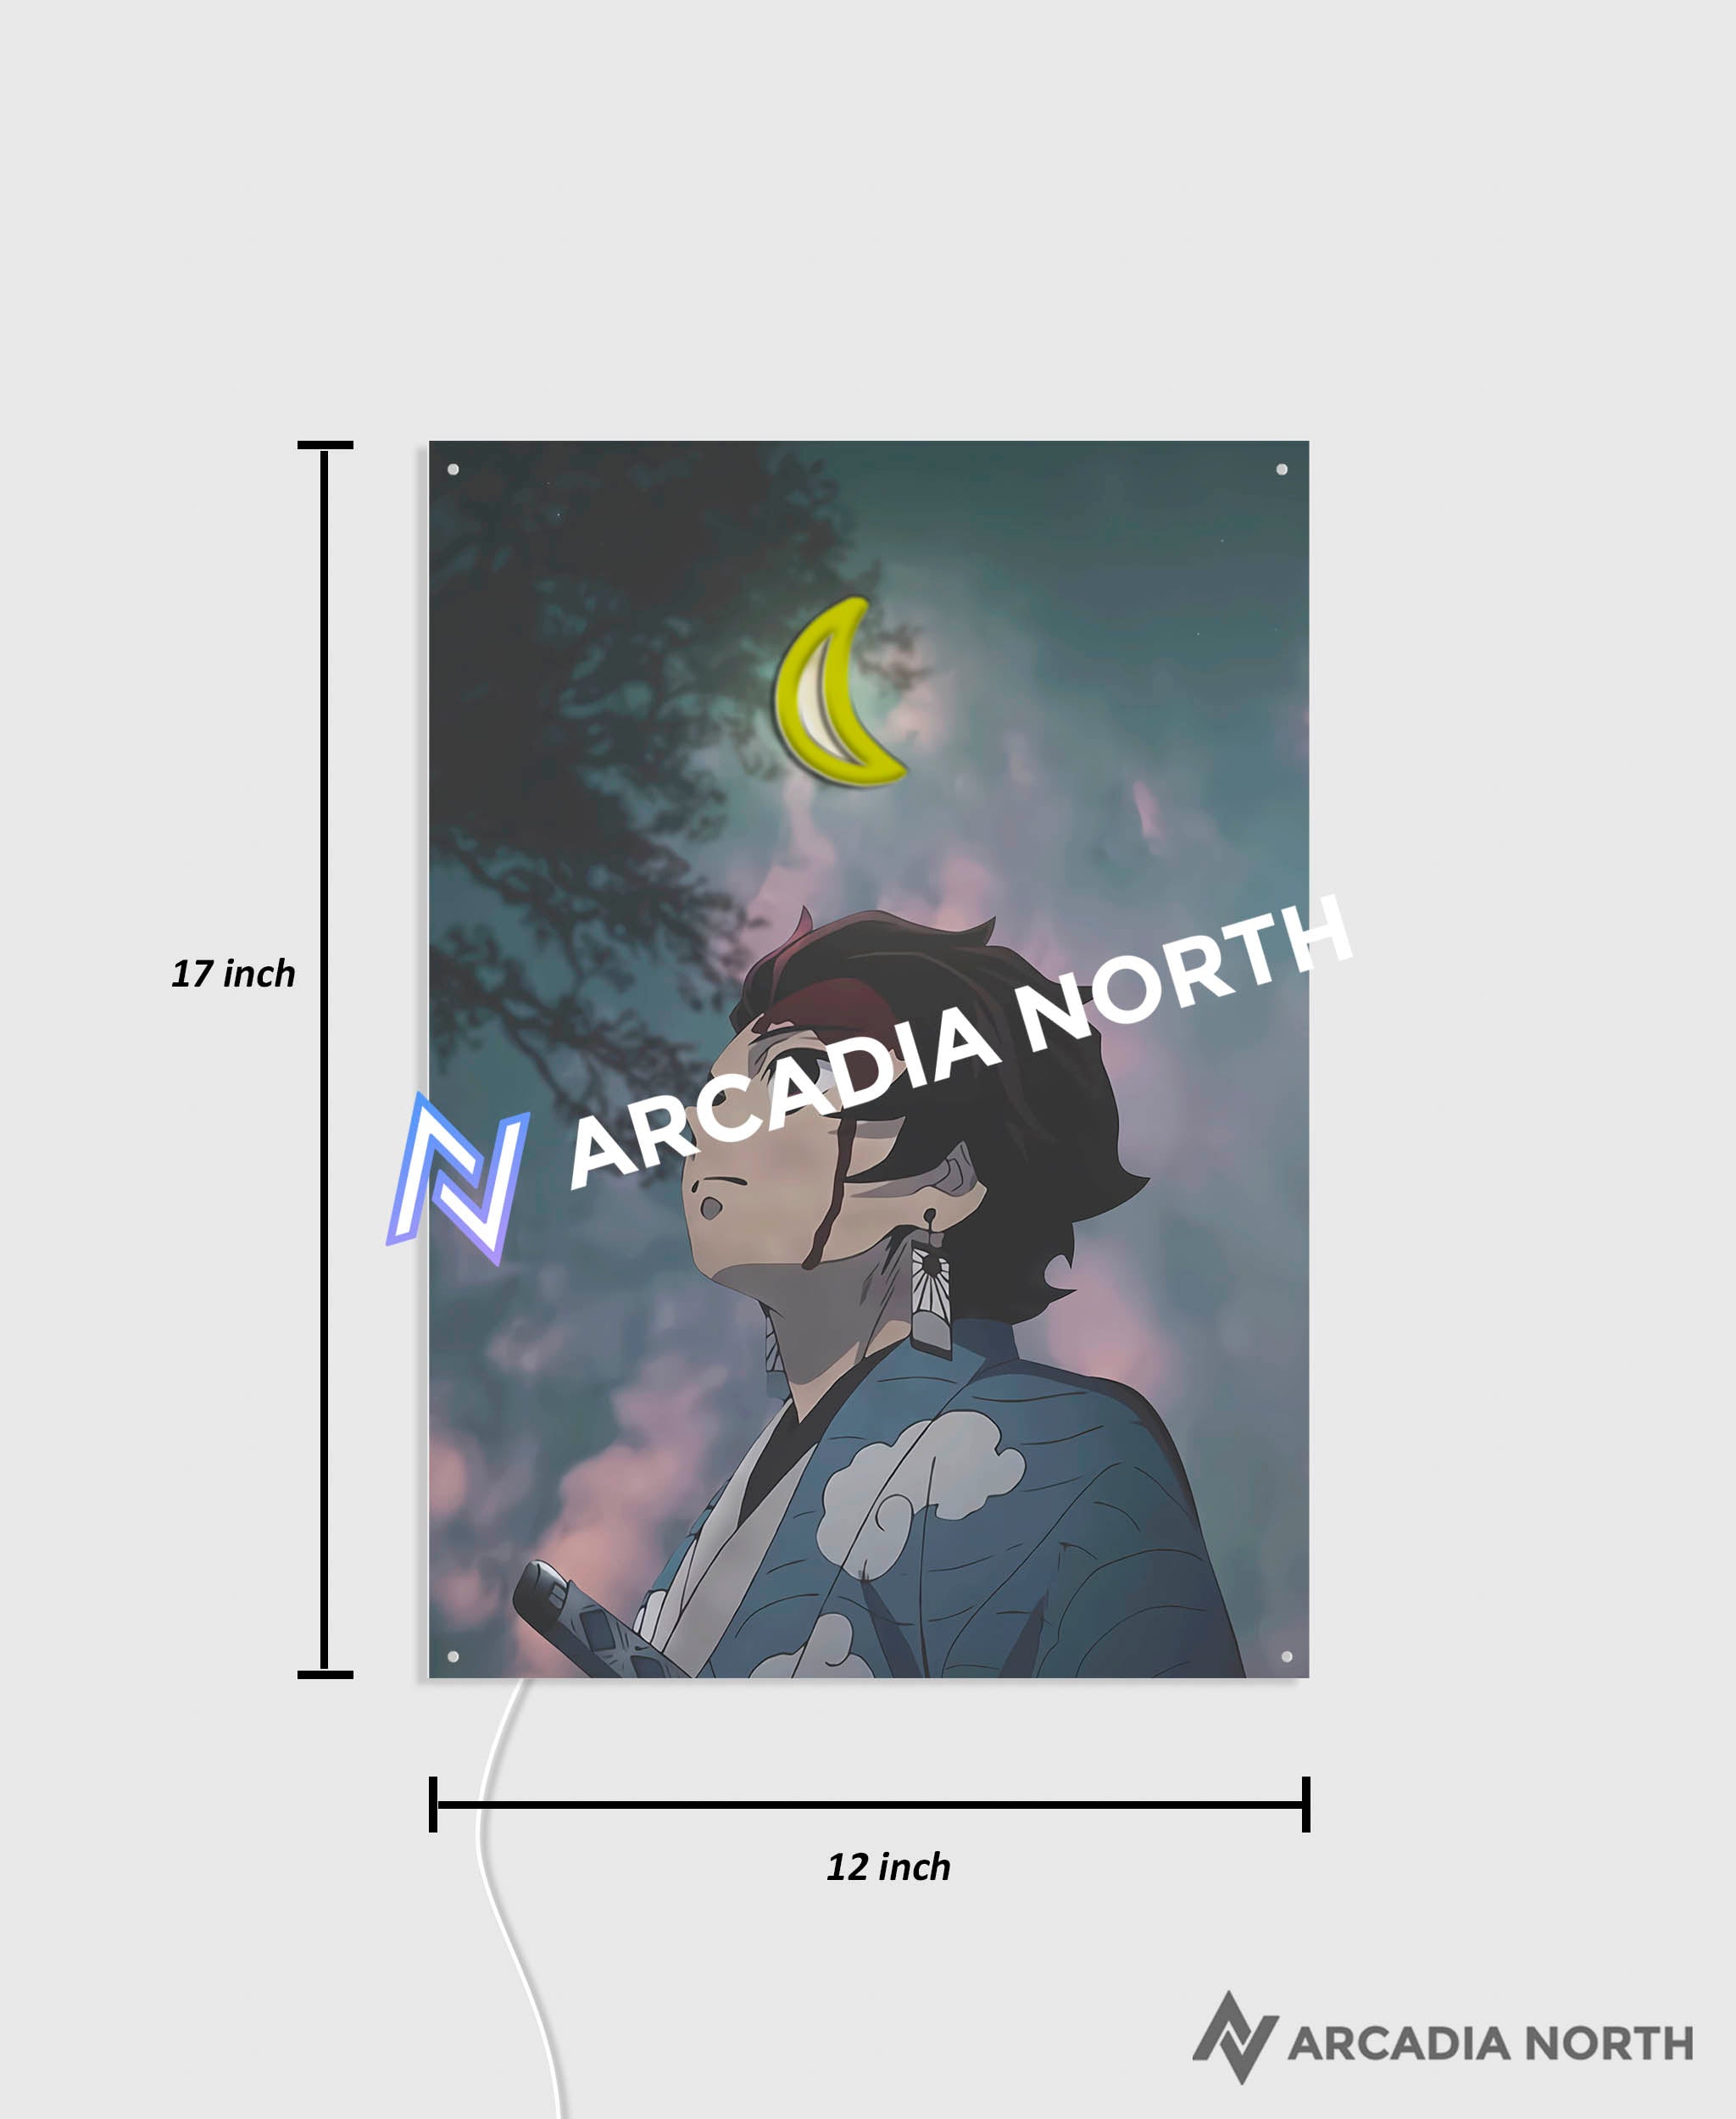 Arcadia North AURALIGHT Original LED Poster featuring the anime Demon Slayer with Tanjiro Kamado in front of a crescent moon Illuminated by glowing neon LED lights. UV-printed on acrylic.